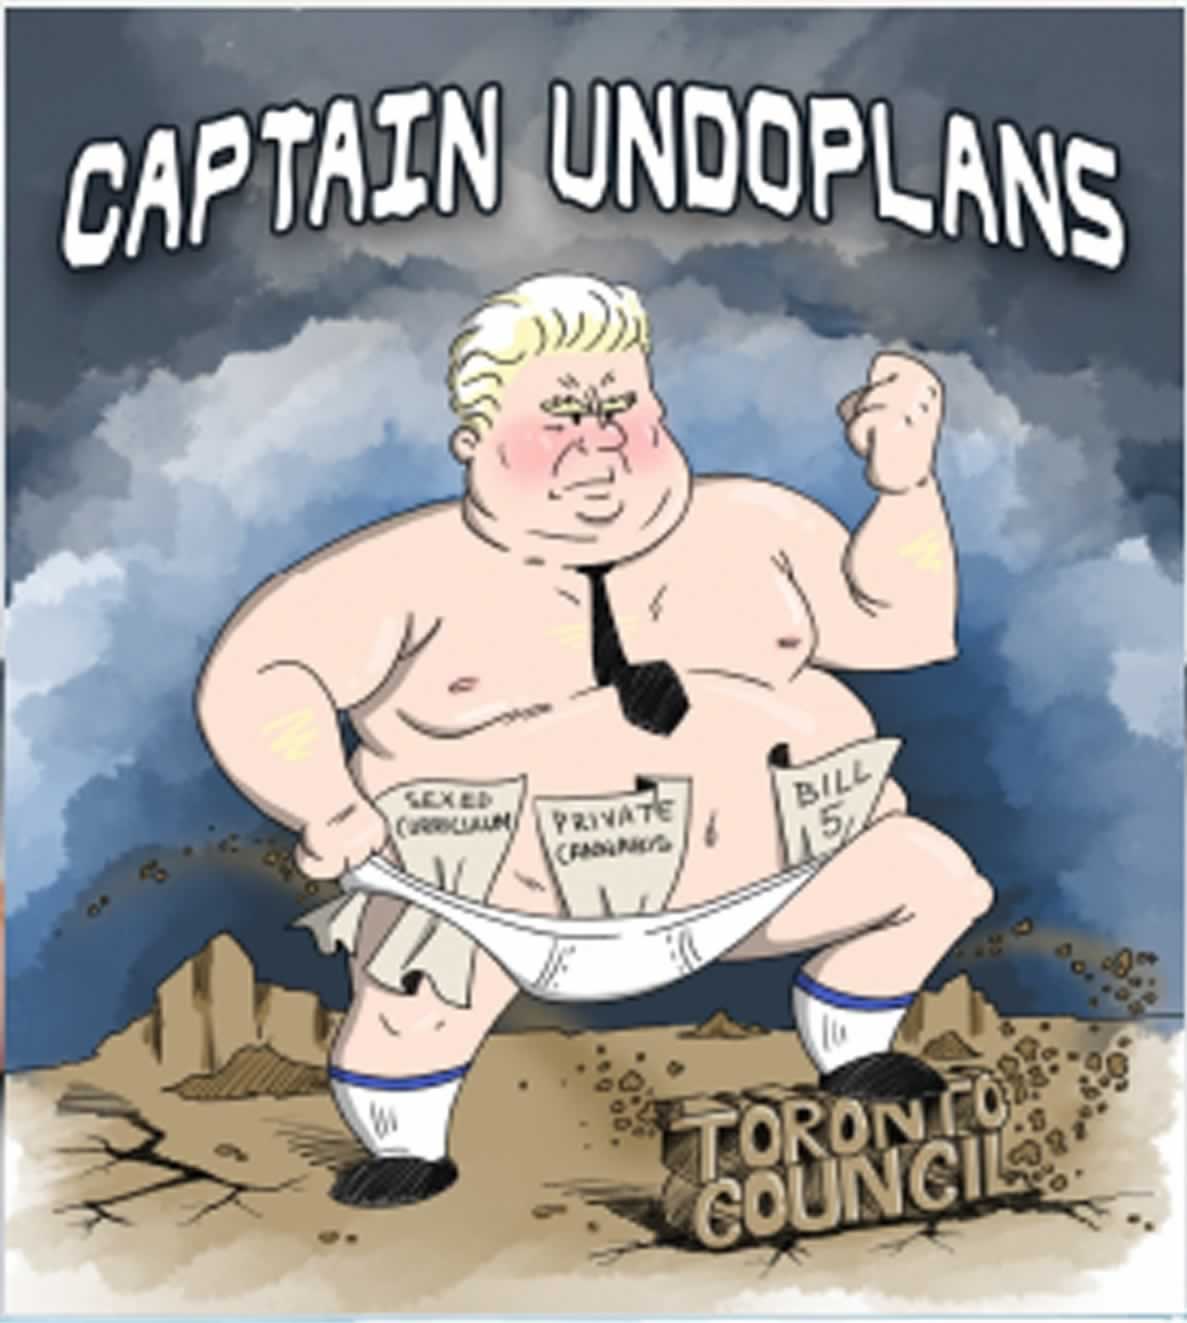 Cartoon of Doug Ford wearing only underwear with the text: "Captain Undoplans"